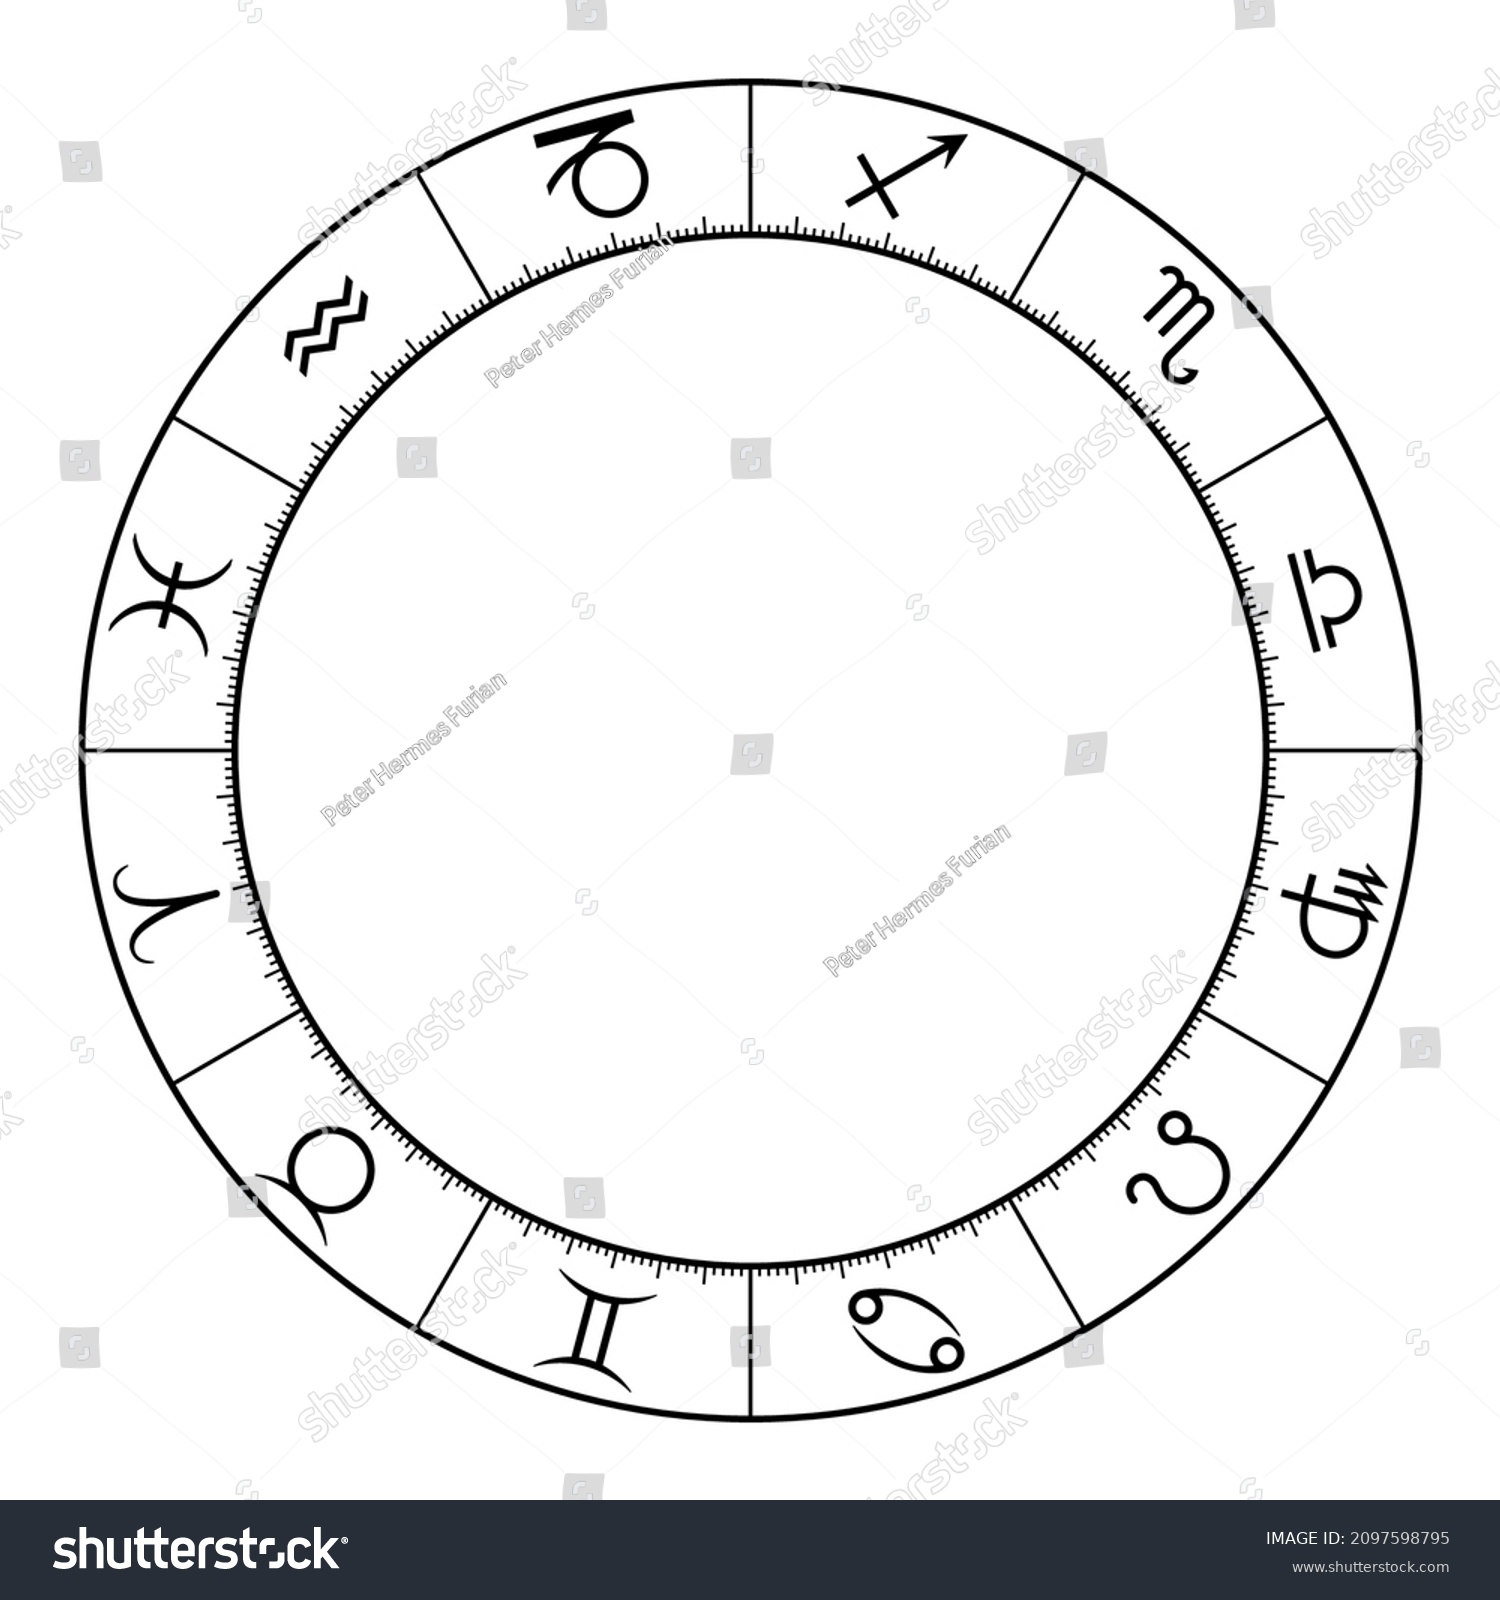 Zodiac Circle Showing Twelve Star Signs Stock Vector (Royalty Free ...